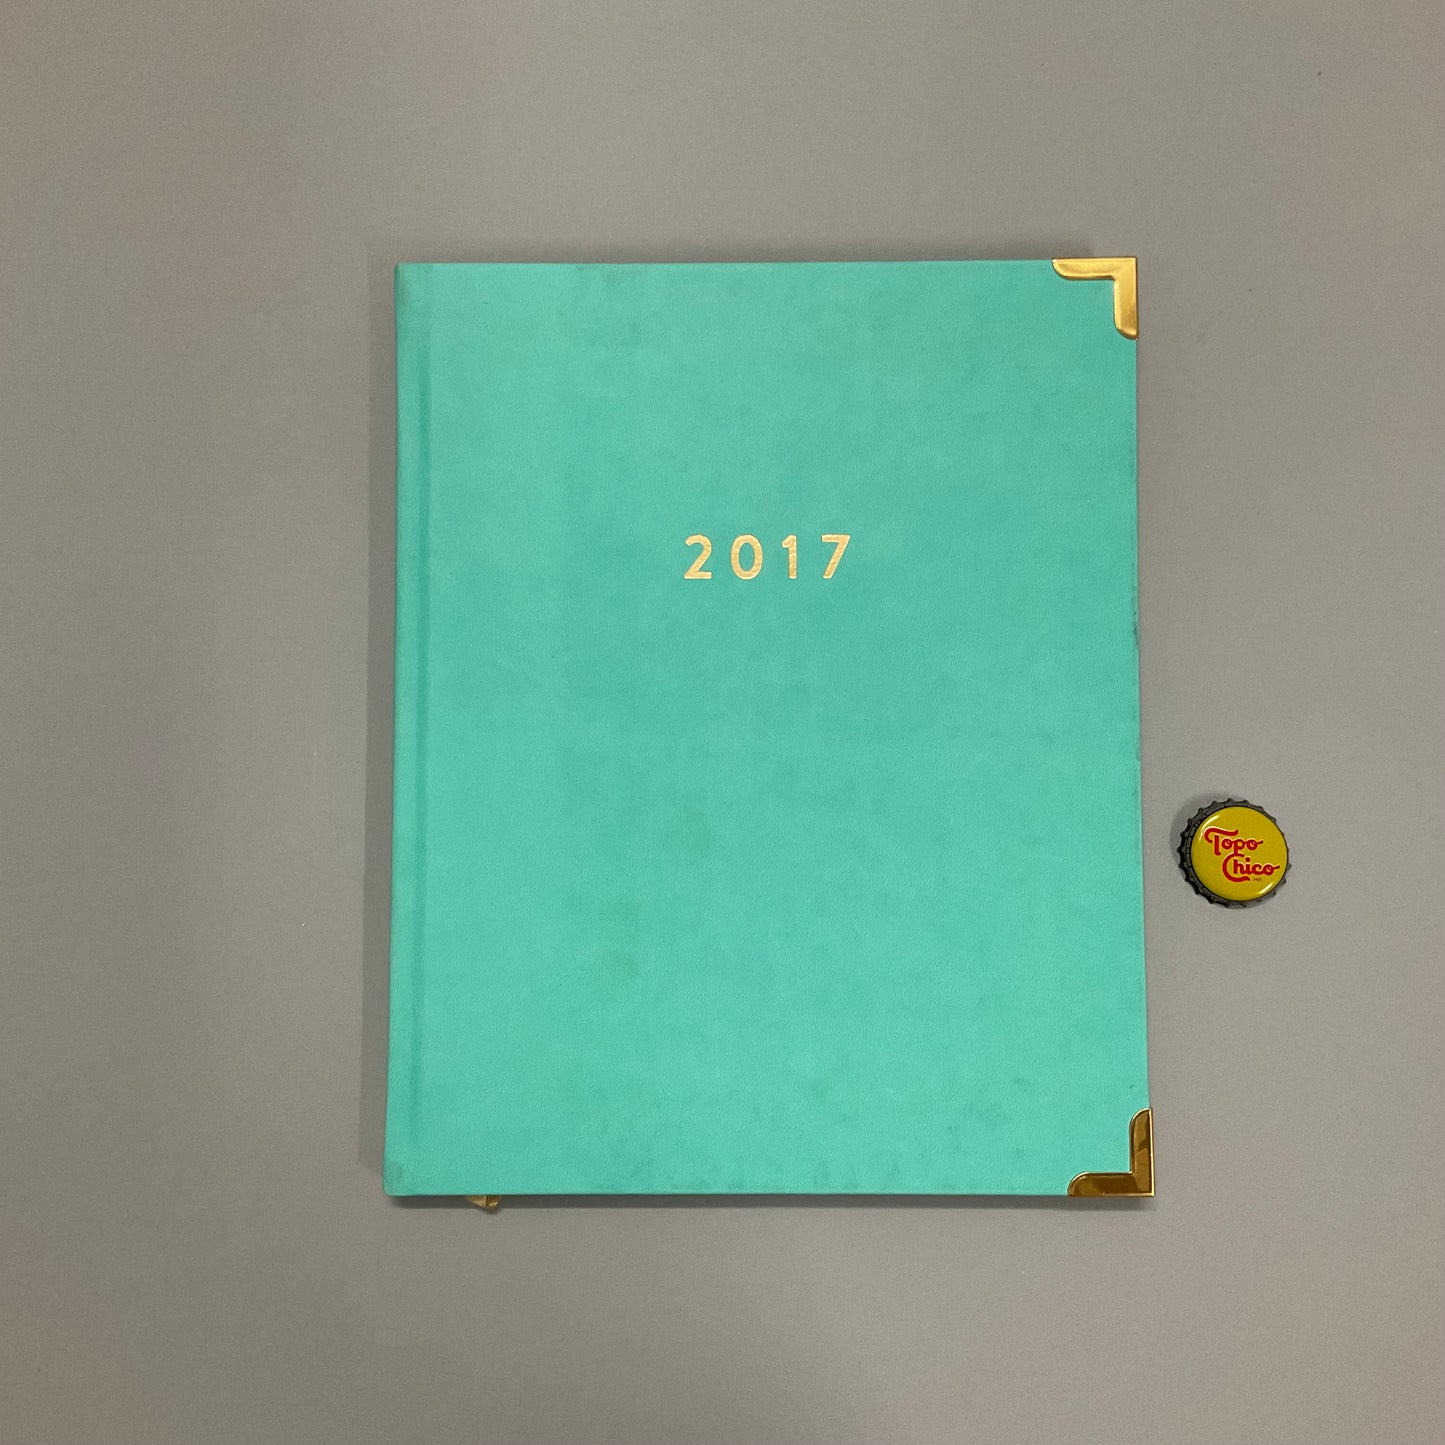 2017 Turquoise Planner